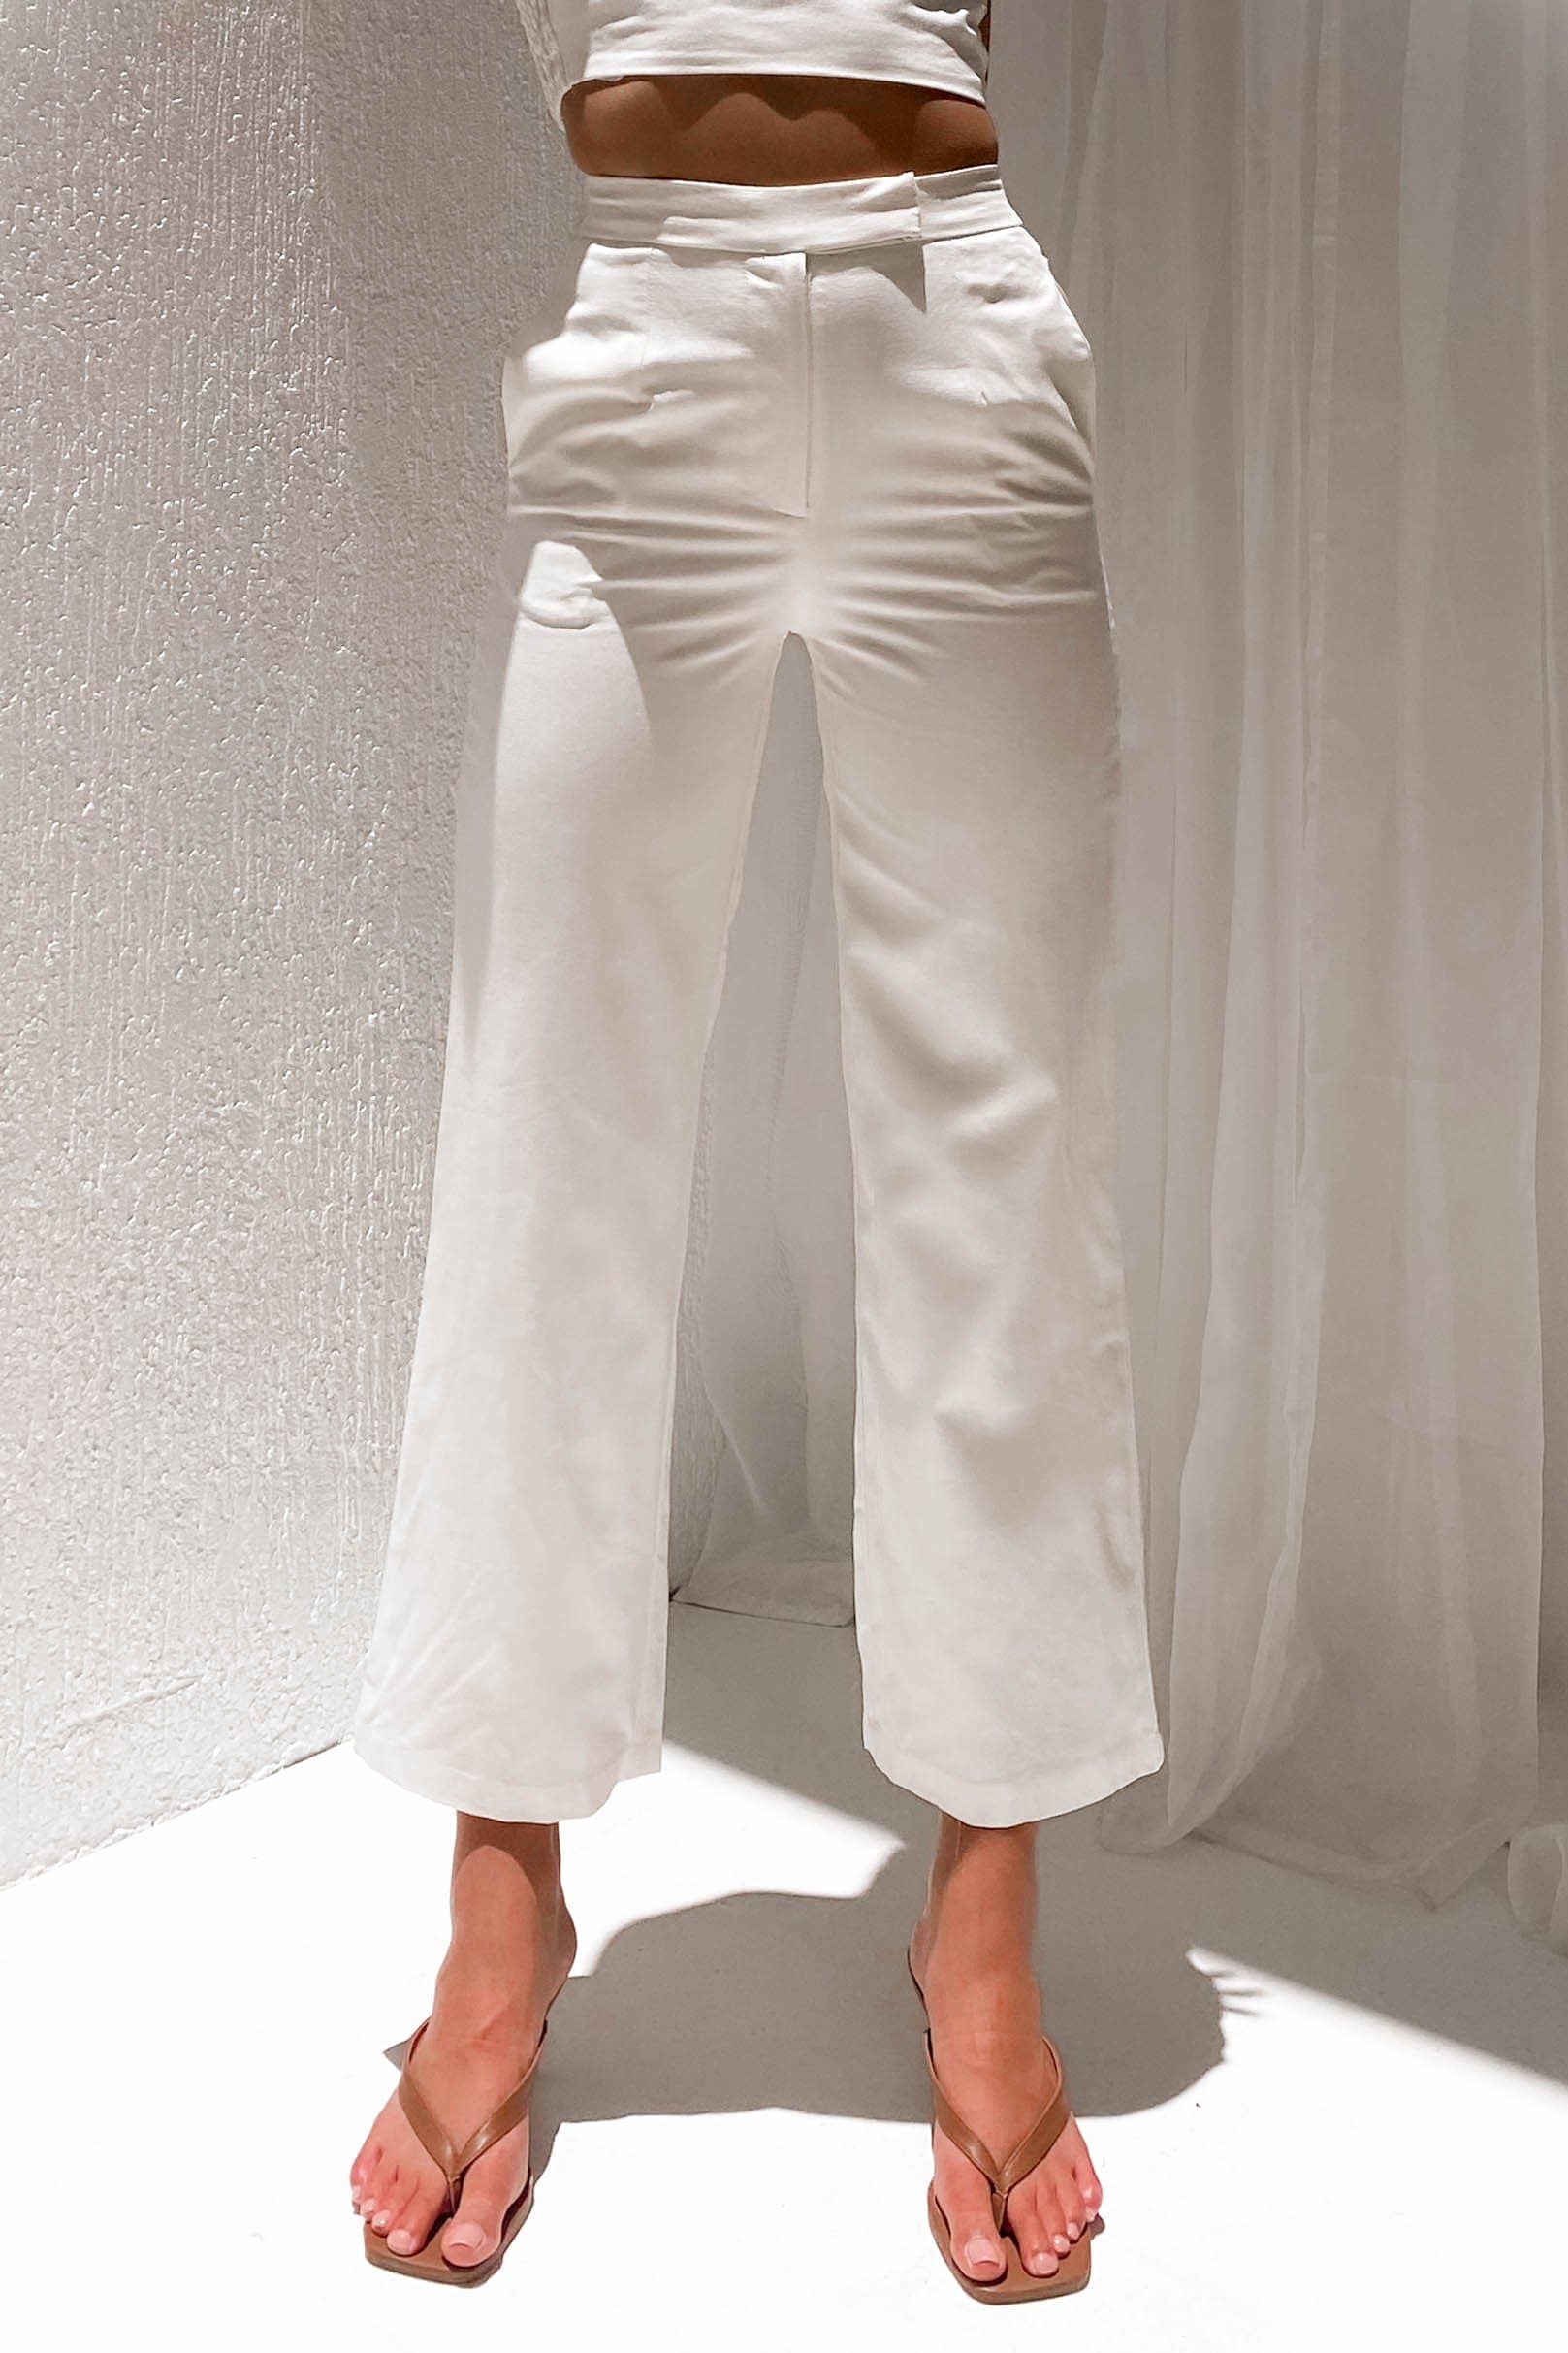 Tanella Pants, BOTTOMS, HIGH WAISTED, HIGH WAISTED PANTS, LINEN & POLYESTER, LINEN AND POLYESTER, new arrivals, PANTS, POLYESTER AND LINEN, WHITE, , -MISHKAH